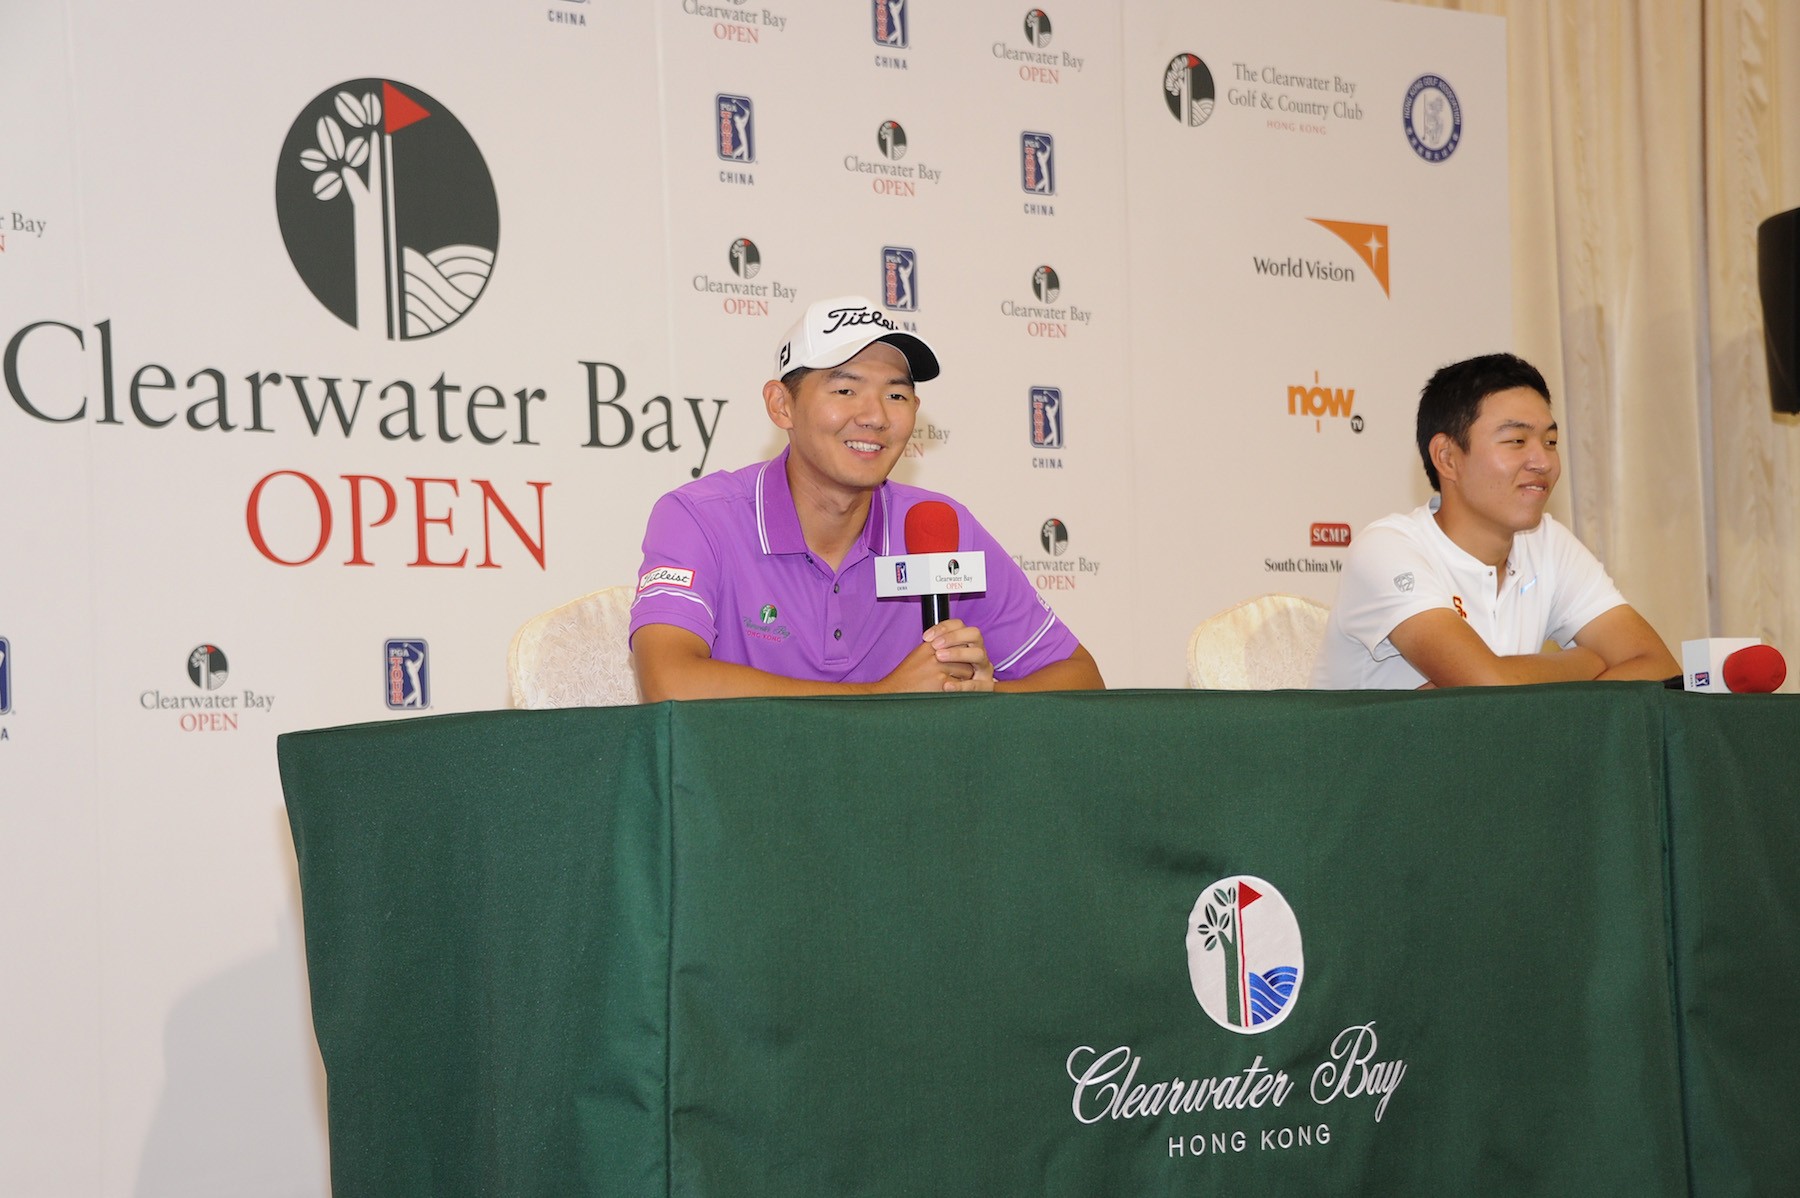 Home hope Jason Hak speaks ahead of the Clearwater Bay Open. Photos: PGA Tour China